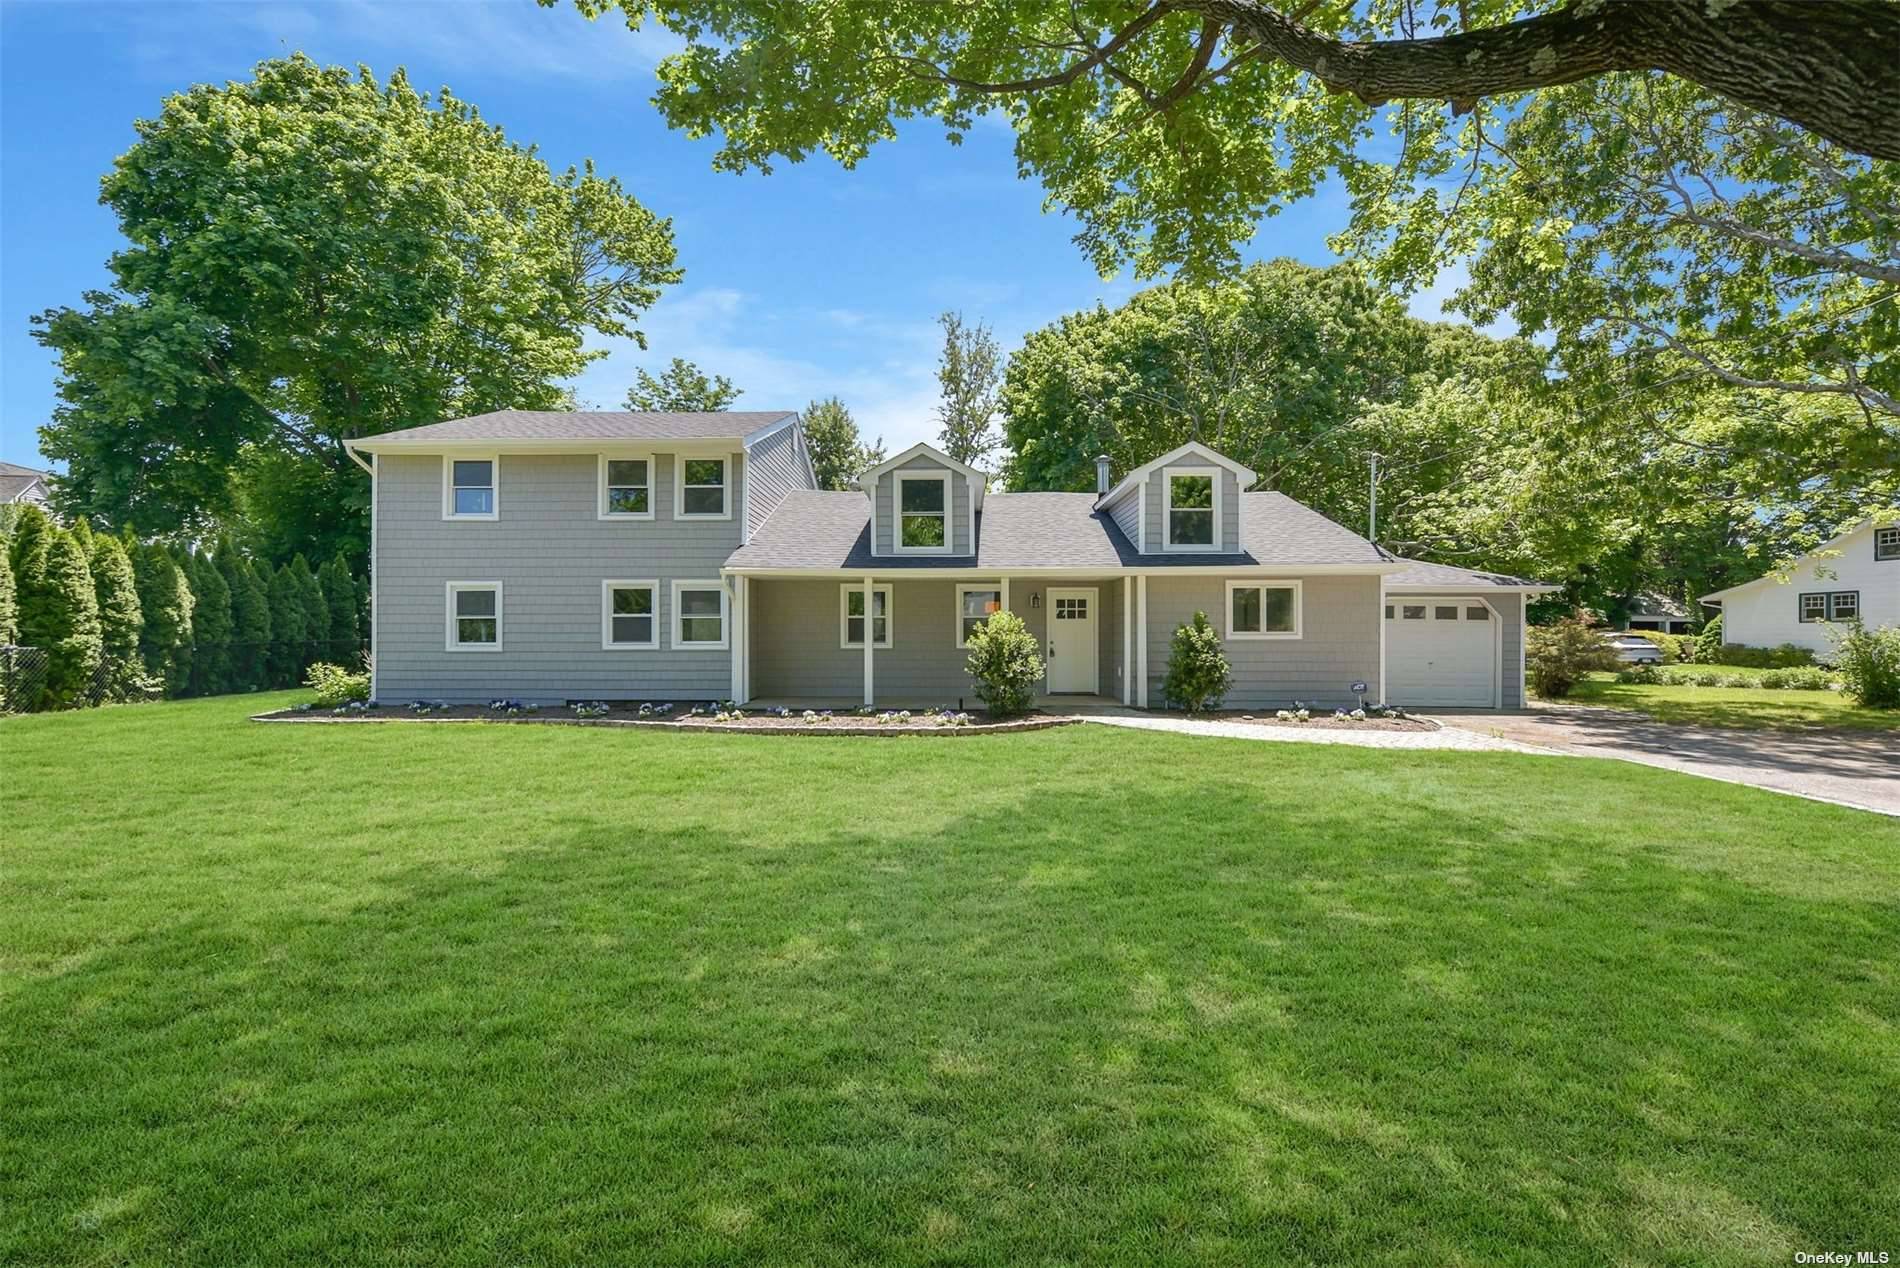 Move right into this completely renovated, turn key Southold Village home close to town and all the best Peconic Bay beaches !